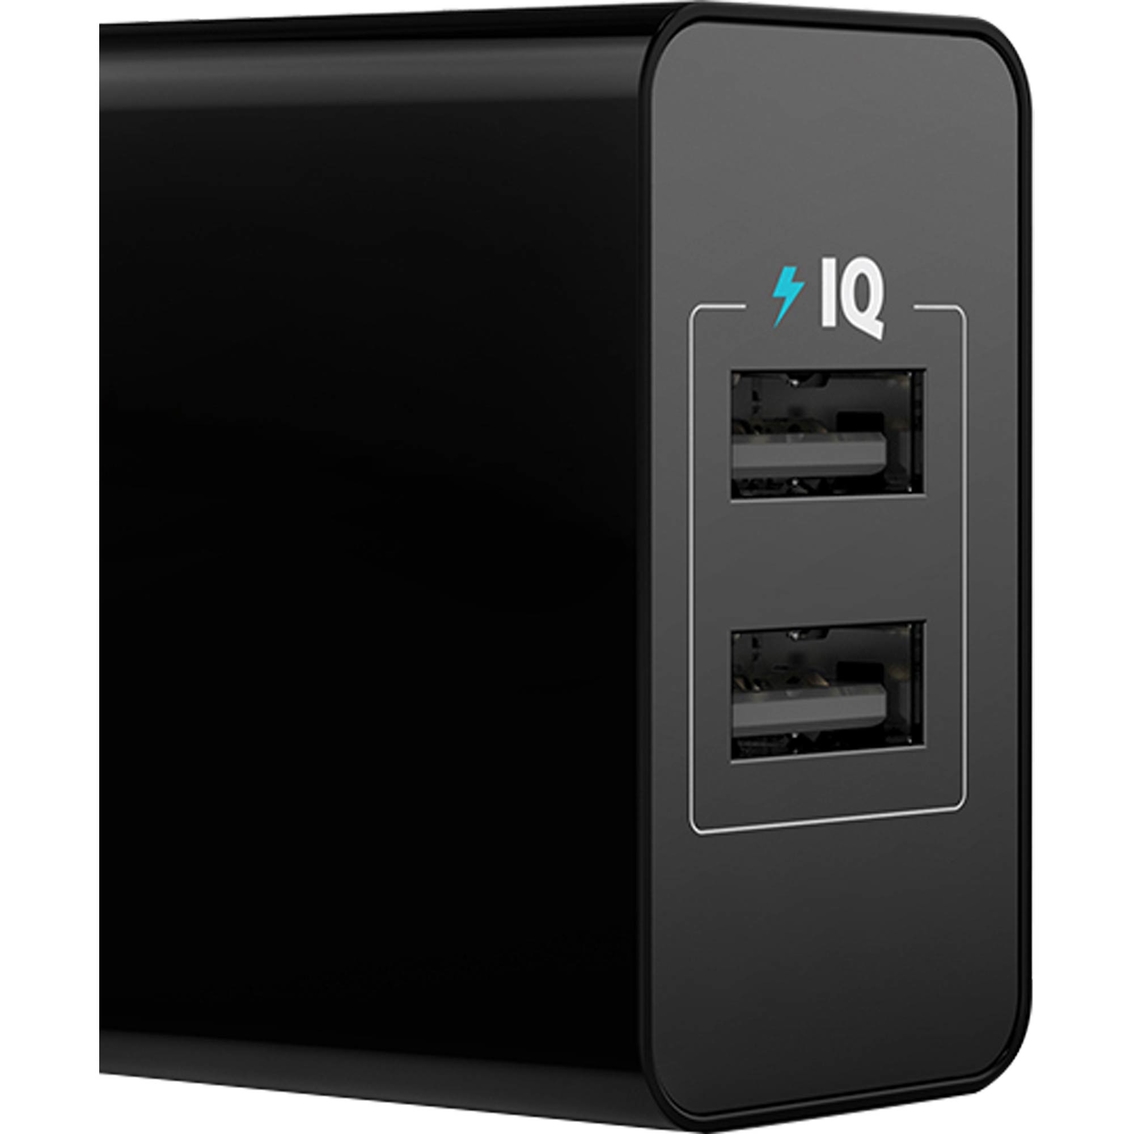 Anker 24W 2 Port USB Charger - Image 4 of 6